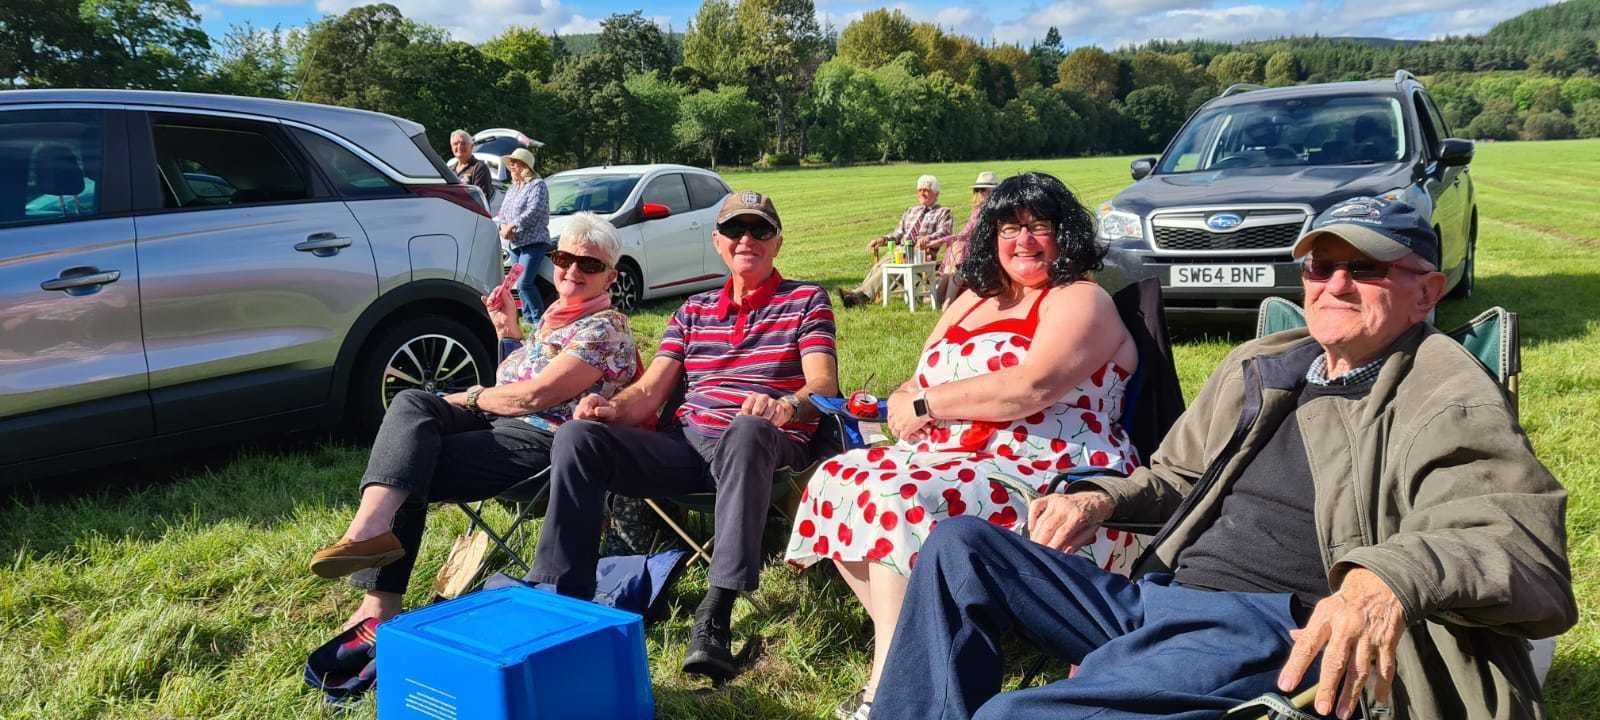 Some revellers at the 'Forgot You Not Rock' drive-in concert for veterans and their guests at Ballindalloch Castle.